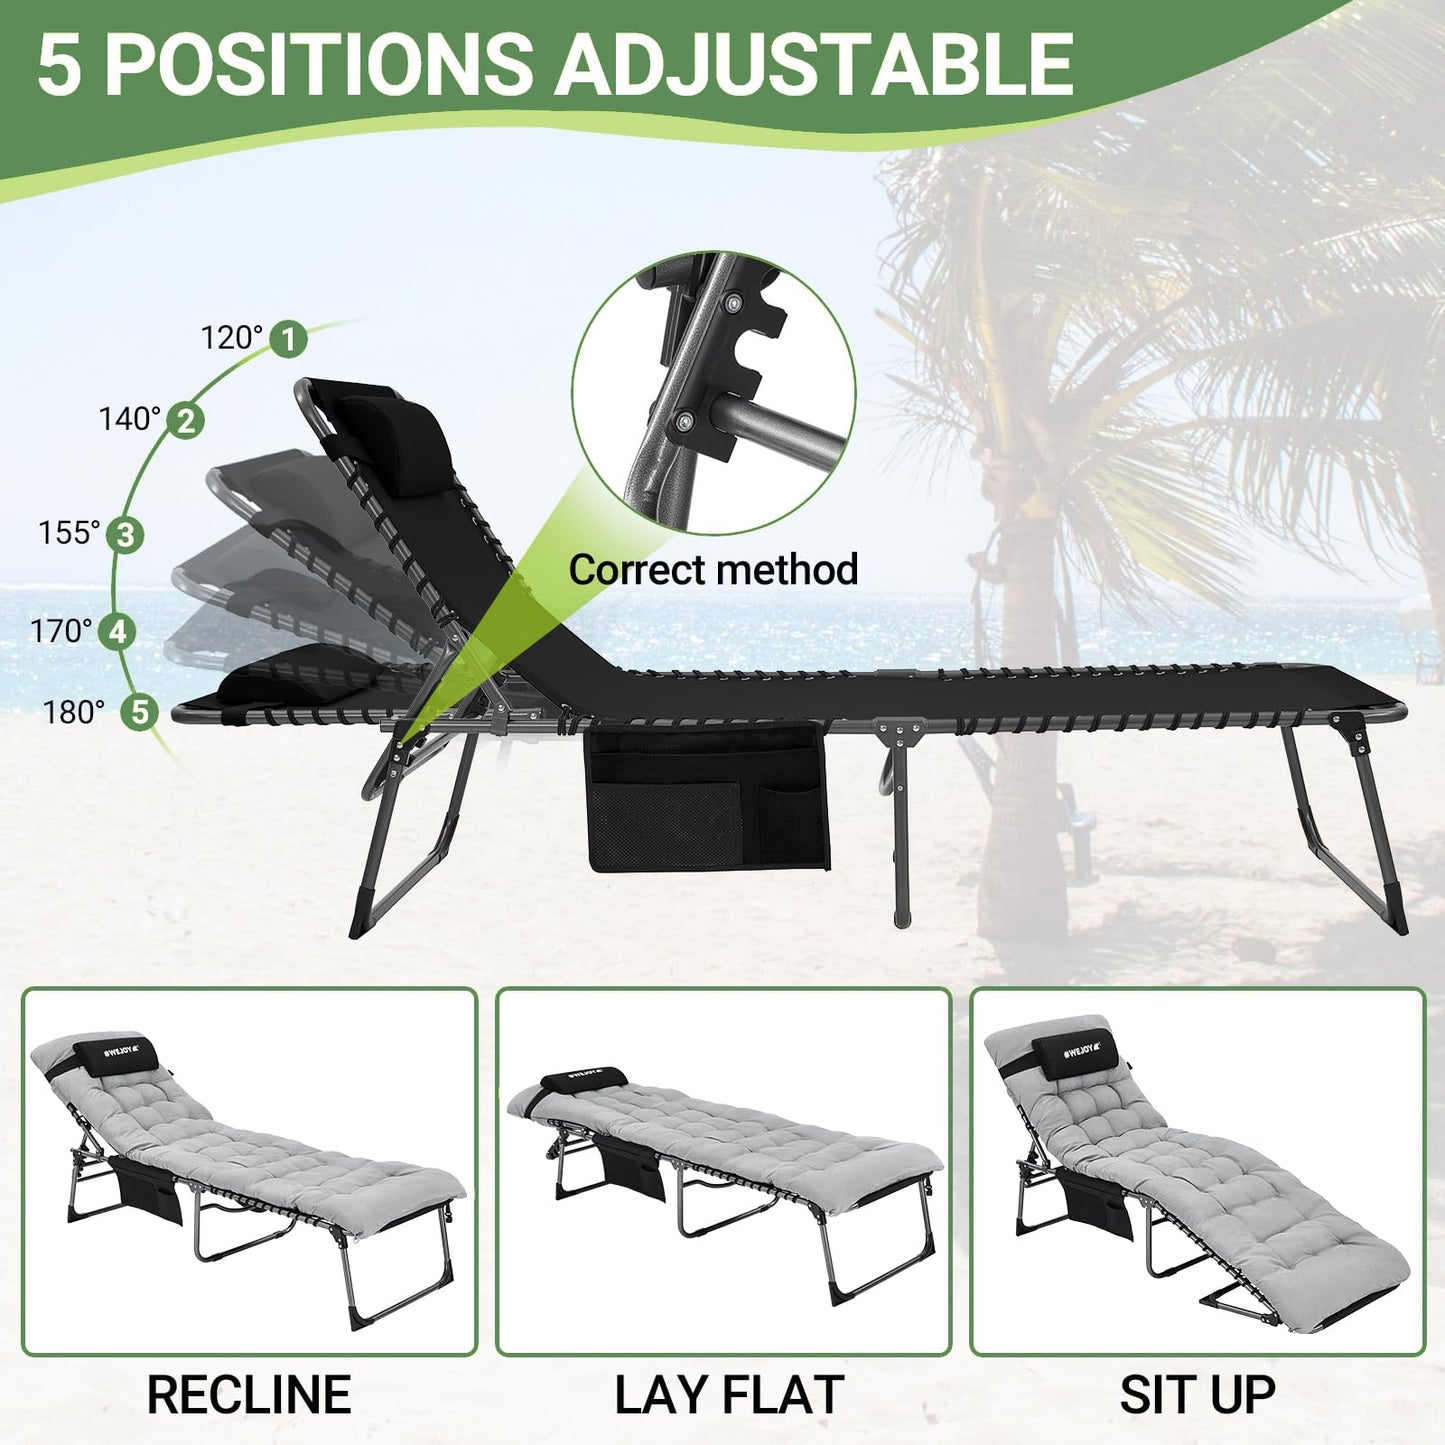 WEJOY All Season Folding Chaise Lounge Chairs With Mat